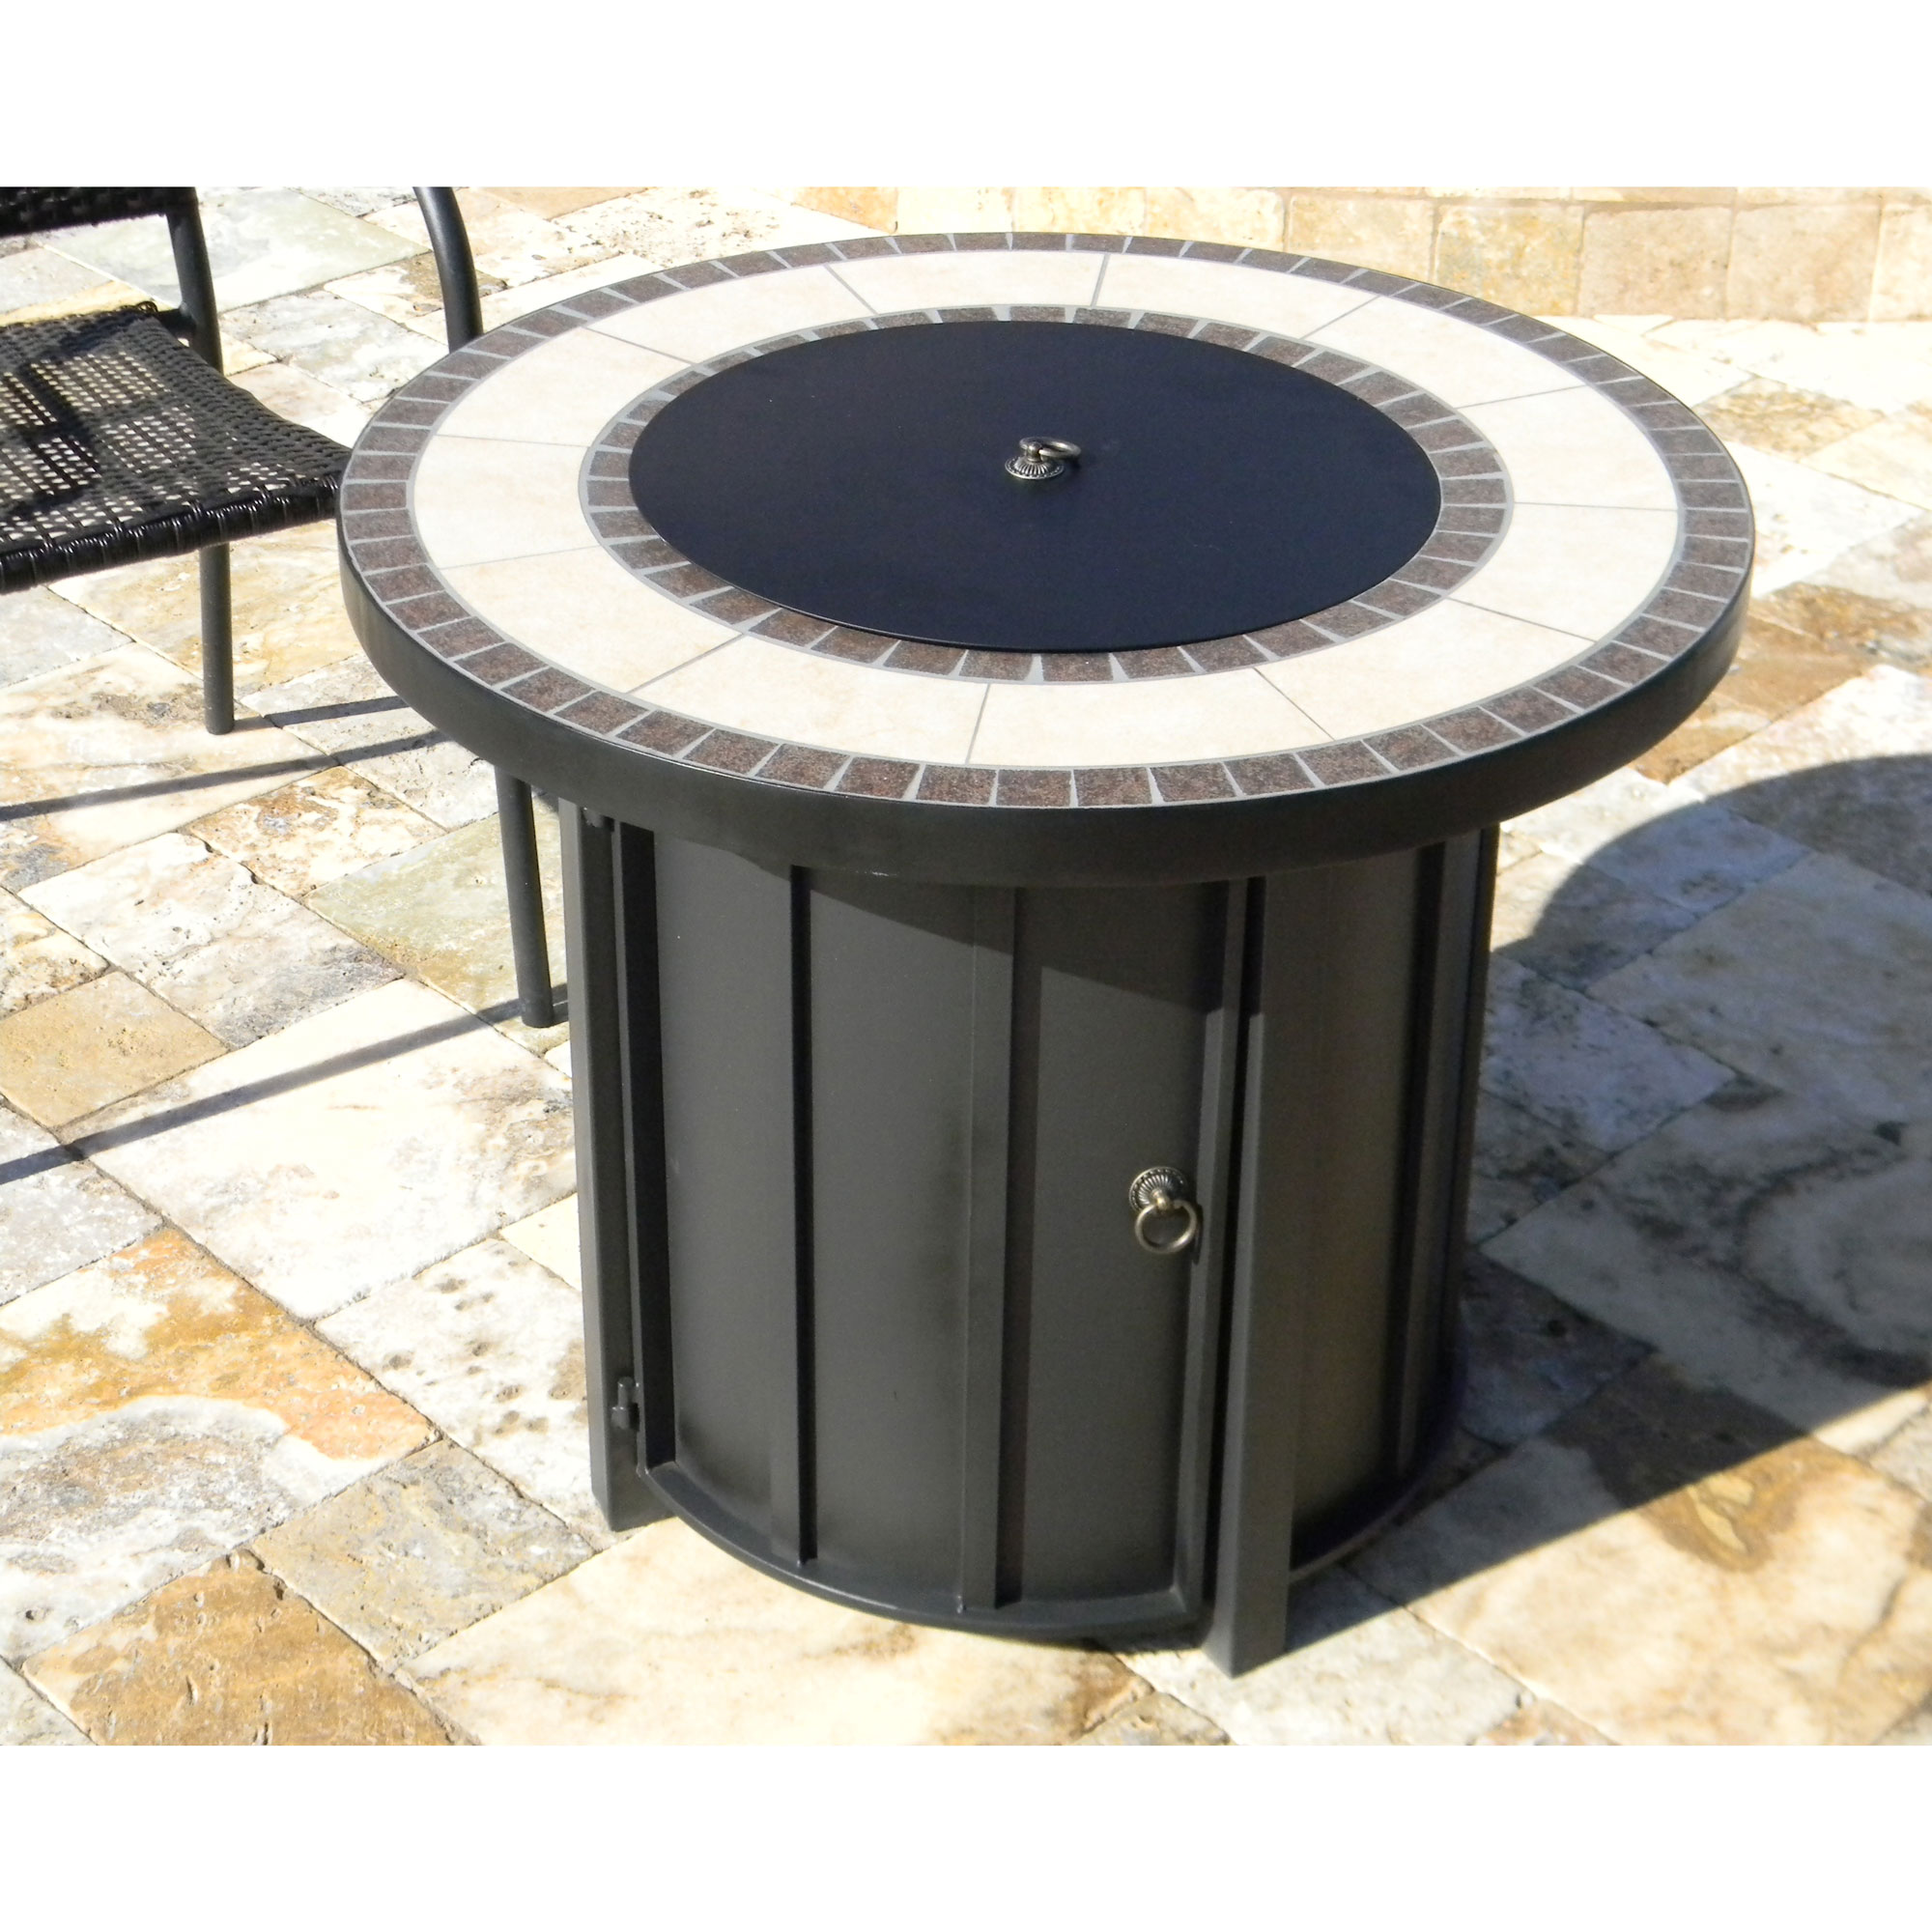 Hiland Afp Ttr Outdoor 30 In Round Tile Table Top Propane Fire Pit